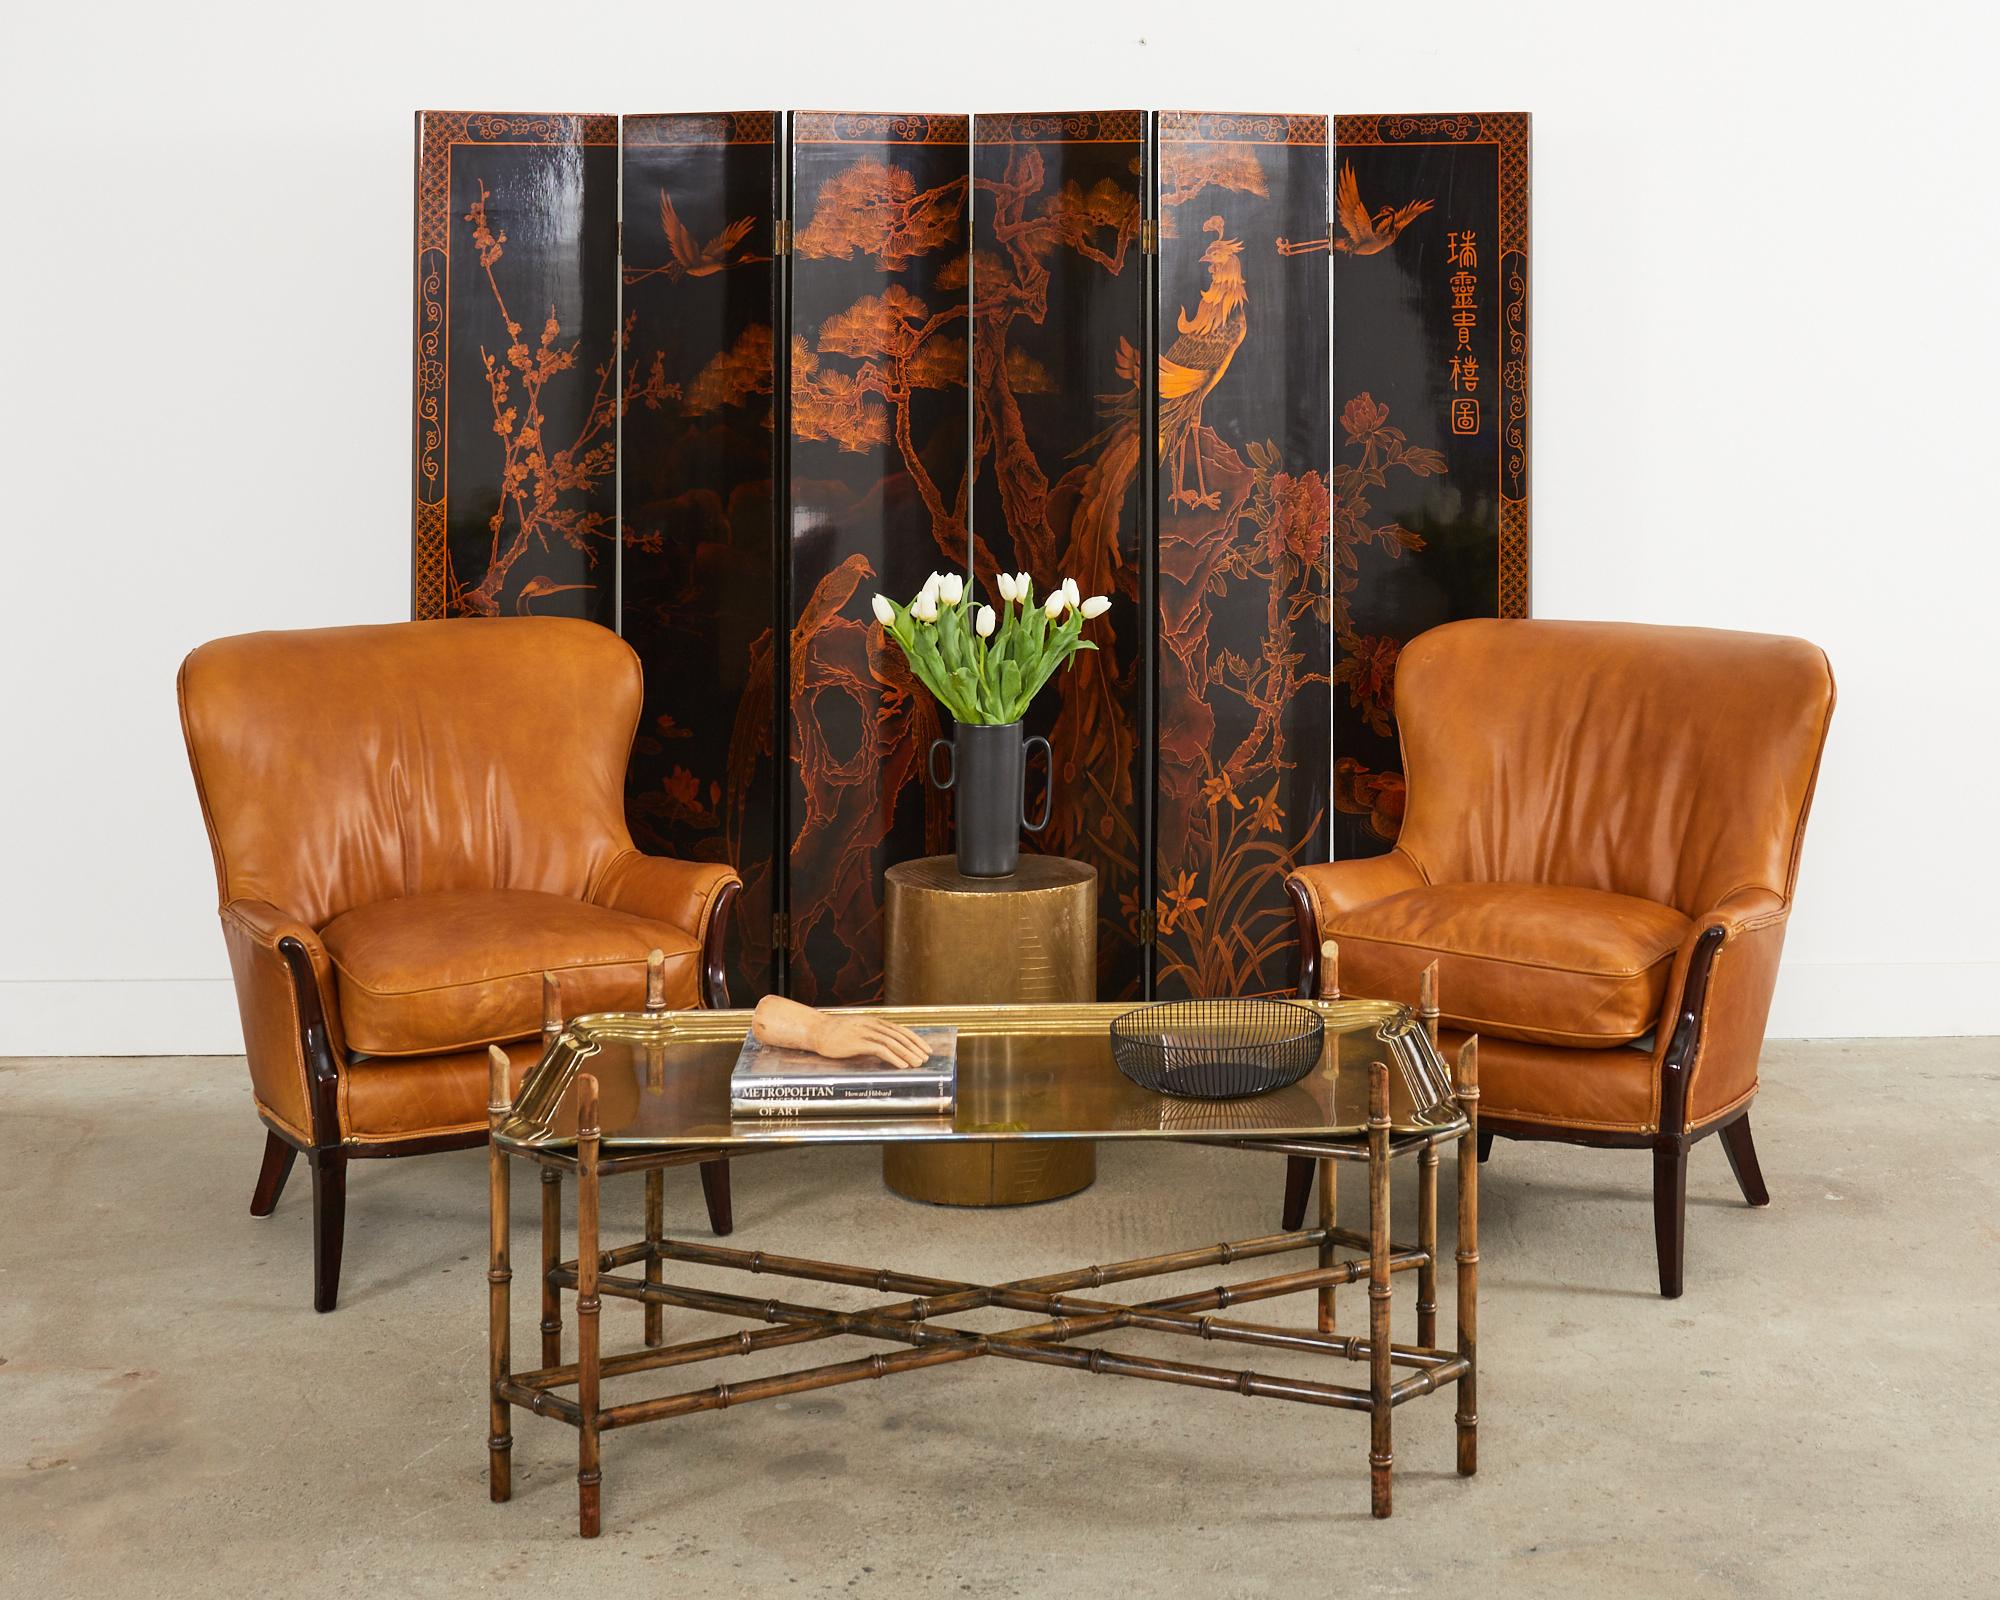 Distinctive pair of Italian mahogany butterfly shaped wingback lounge chairs or armchairs. The chairs feature a modern redux in a rustic, country style with baseball glove cowhide leather upholstery. The soft hides are thick with a desirable aged